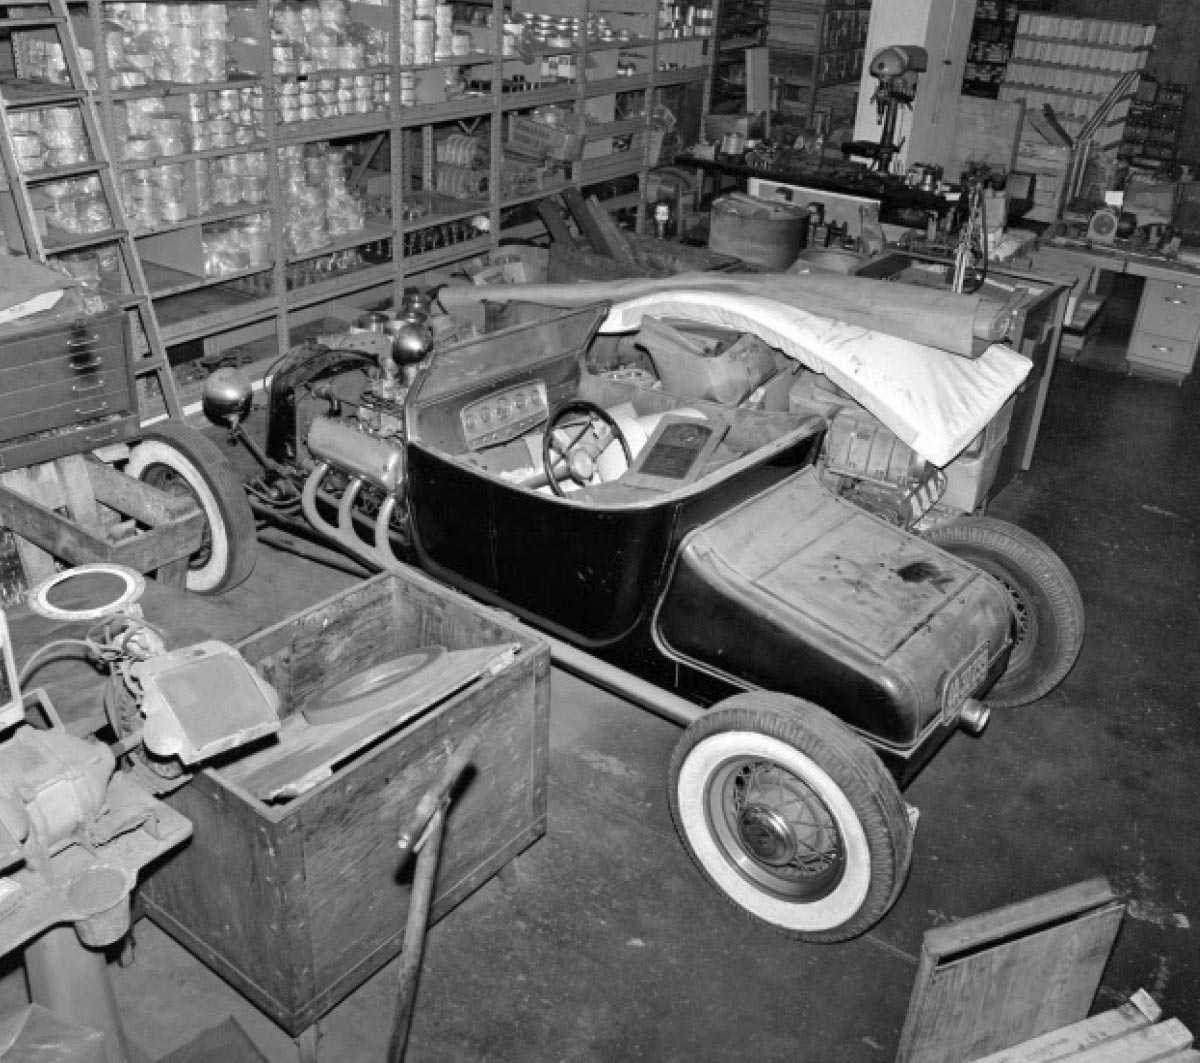 Car in the shop